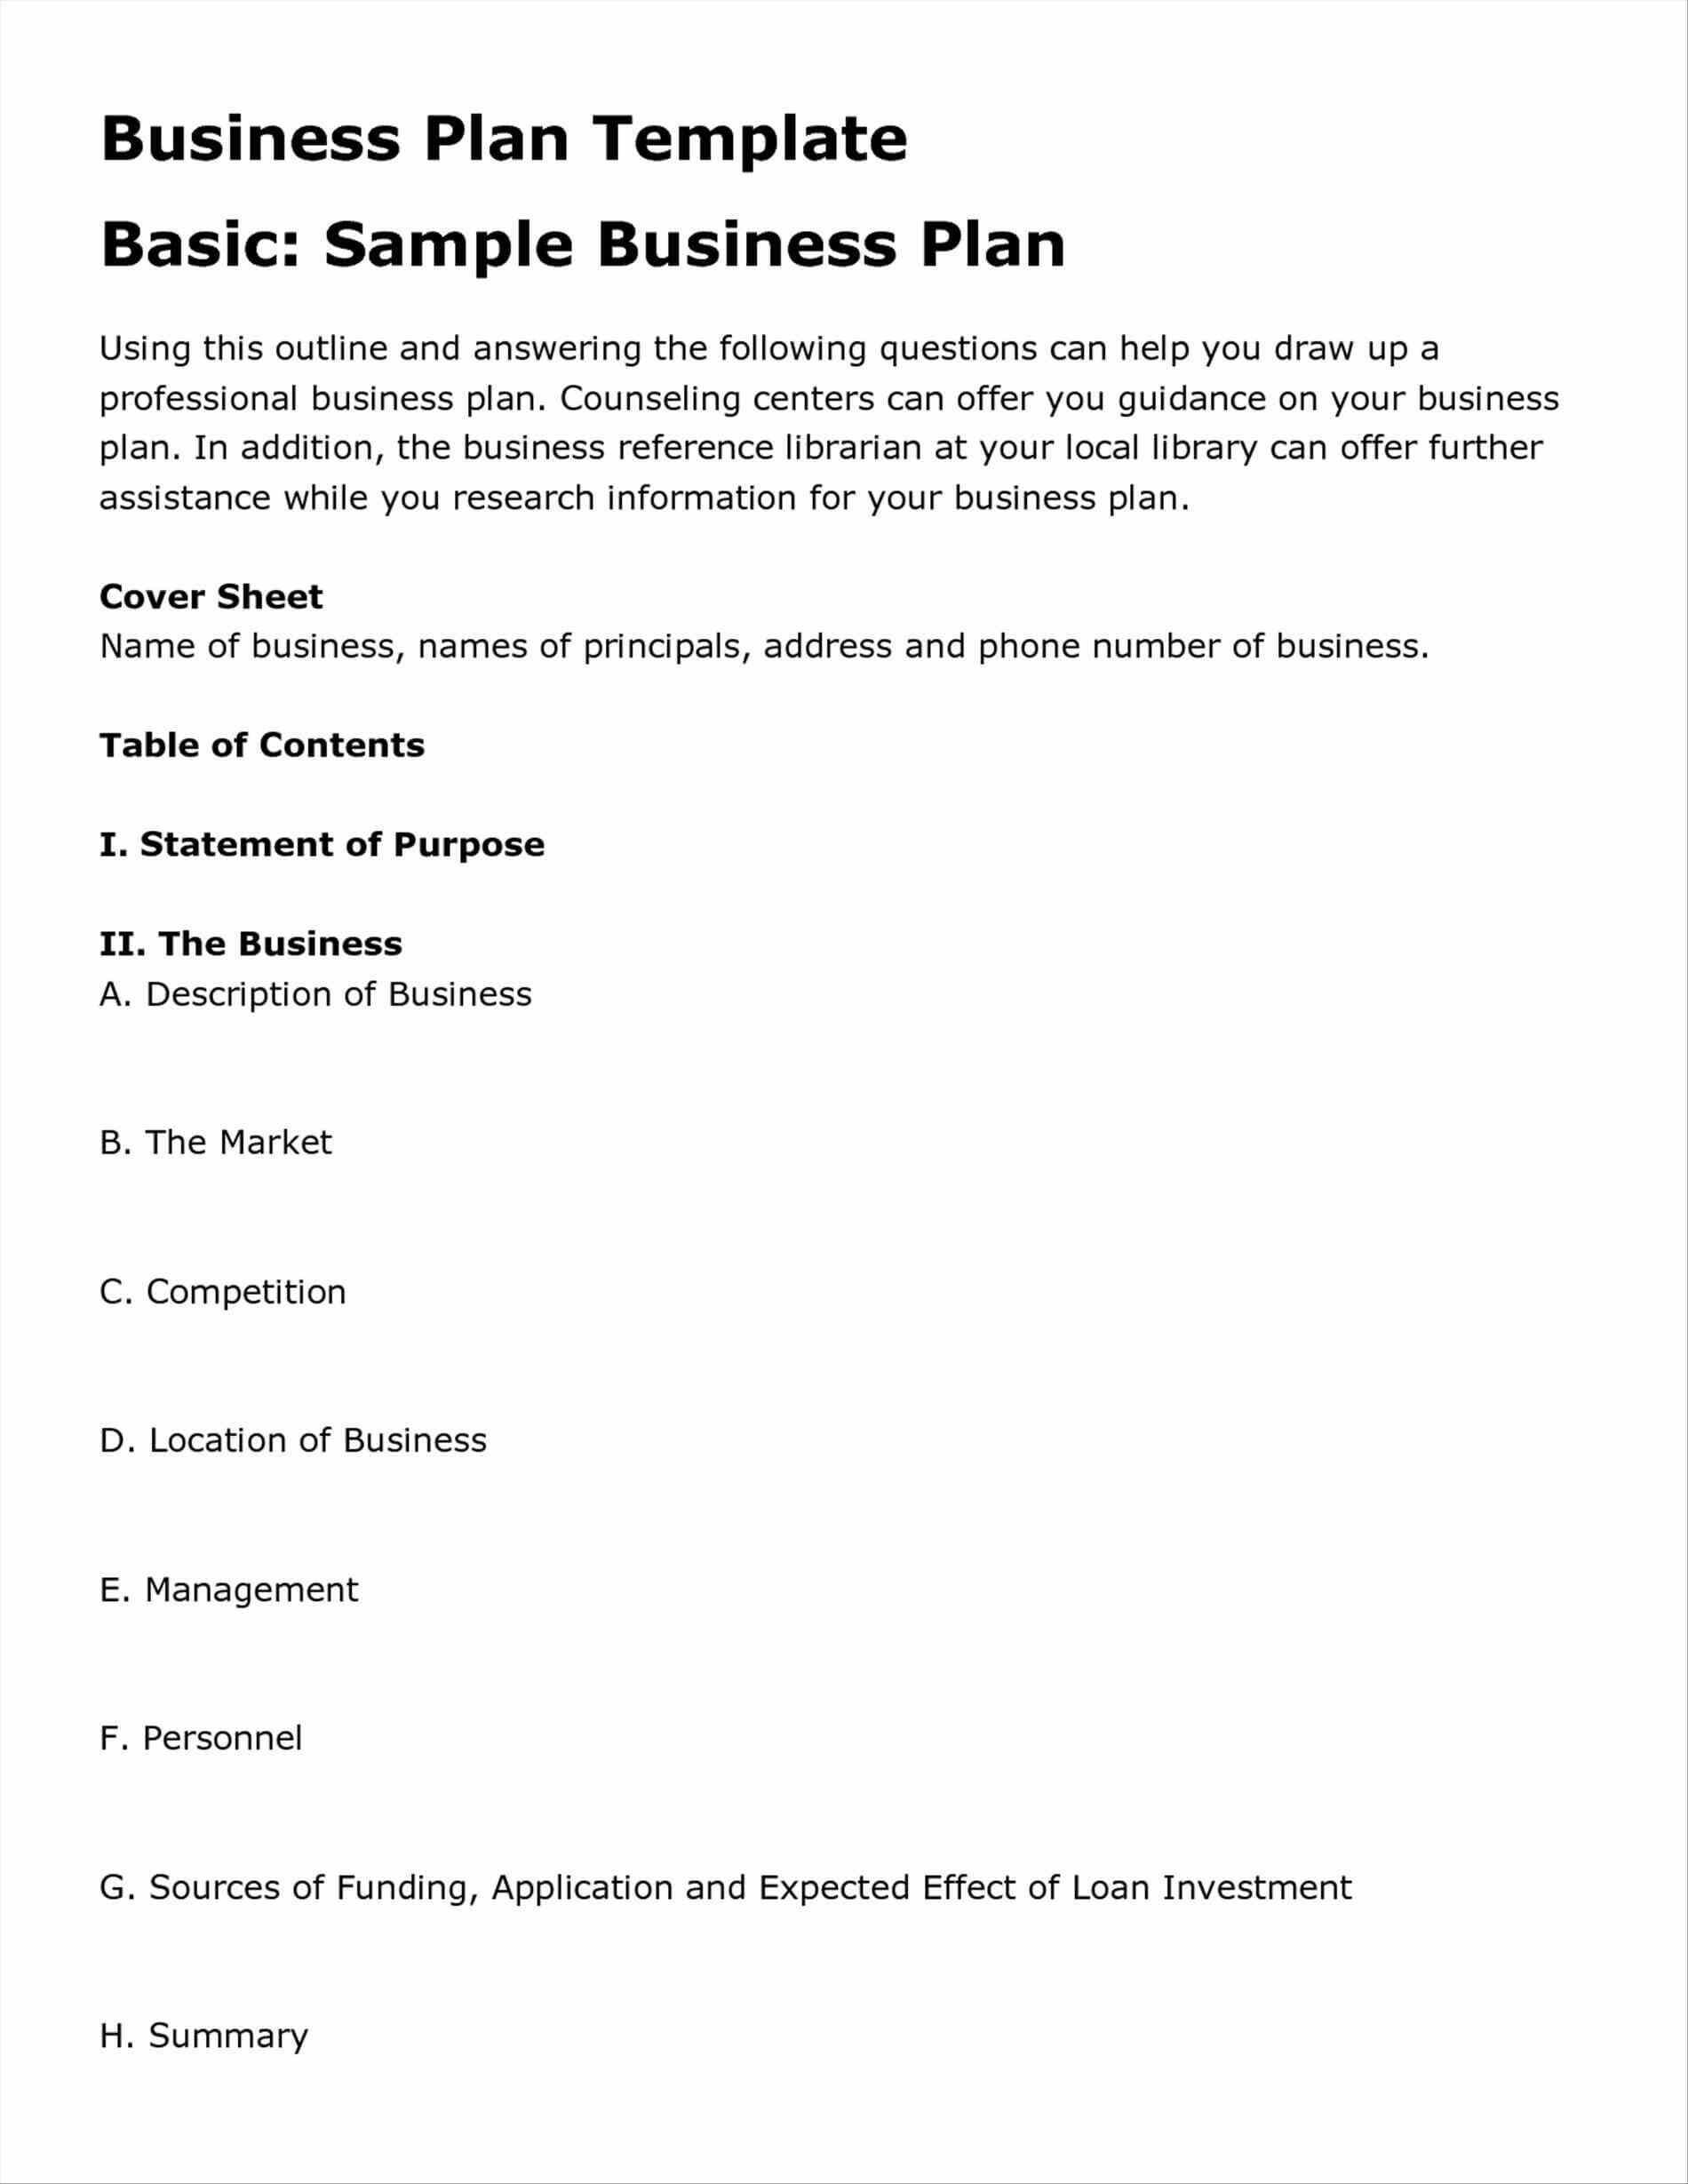 Clothing Line Business Plan Philippines Apparel Brand Sample Regarding Business Plan Template For Clothing Line